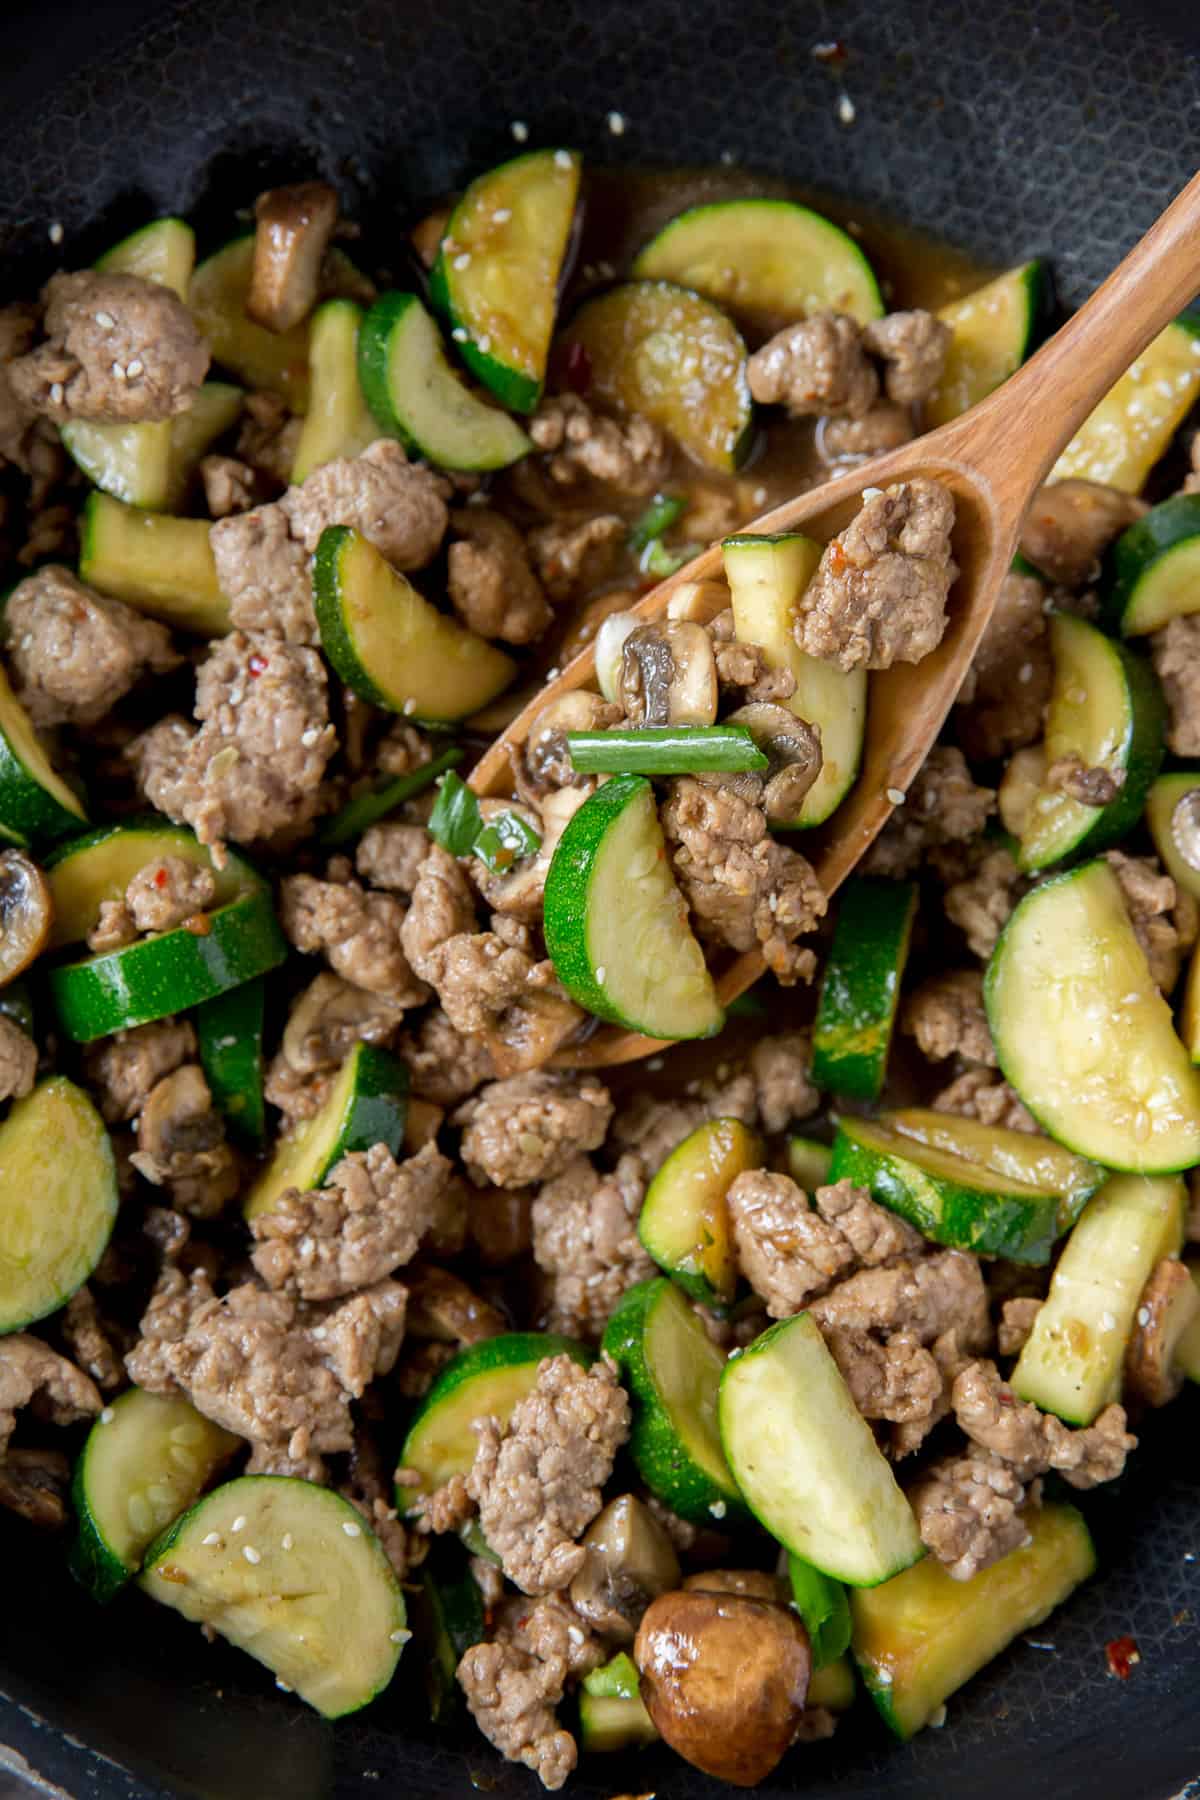 A close up of the ground pork, zucchini, and mushrooms.